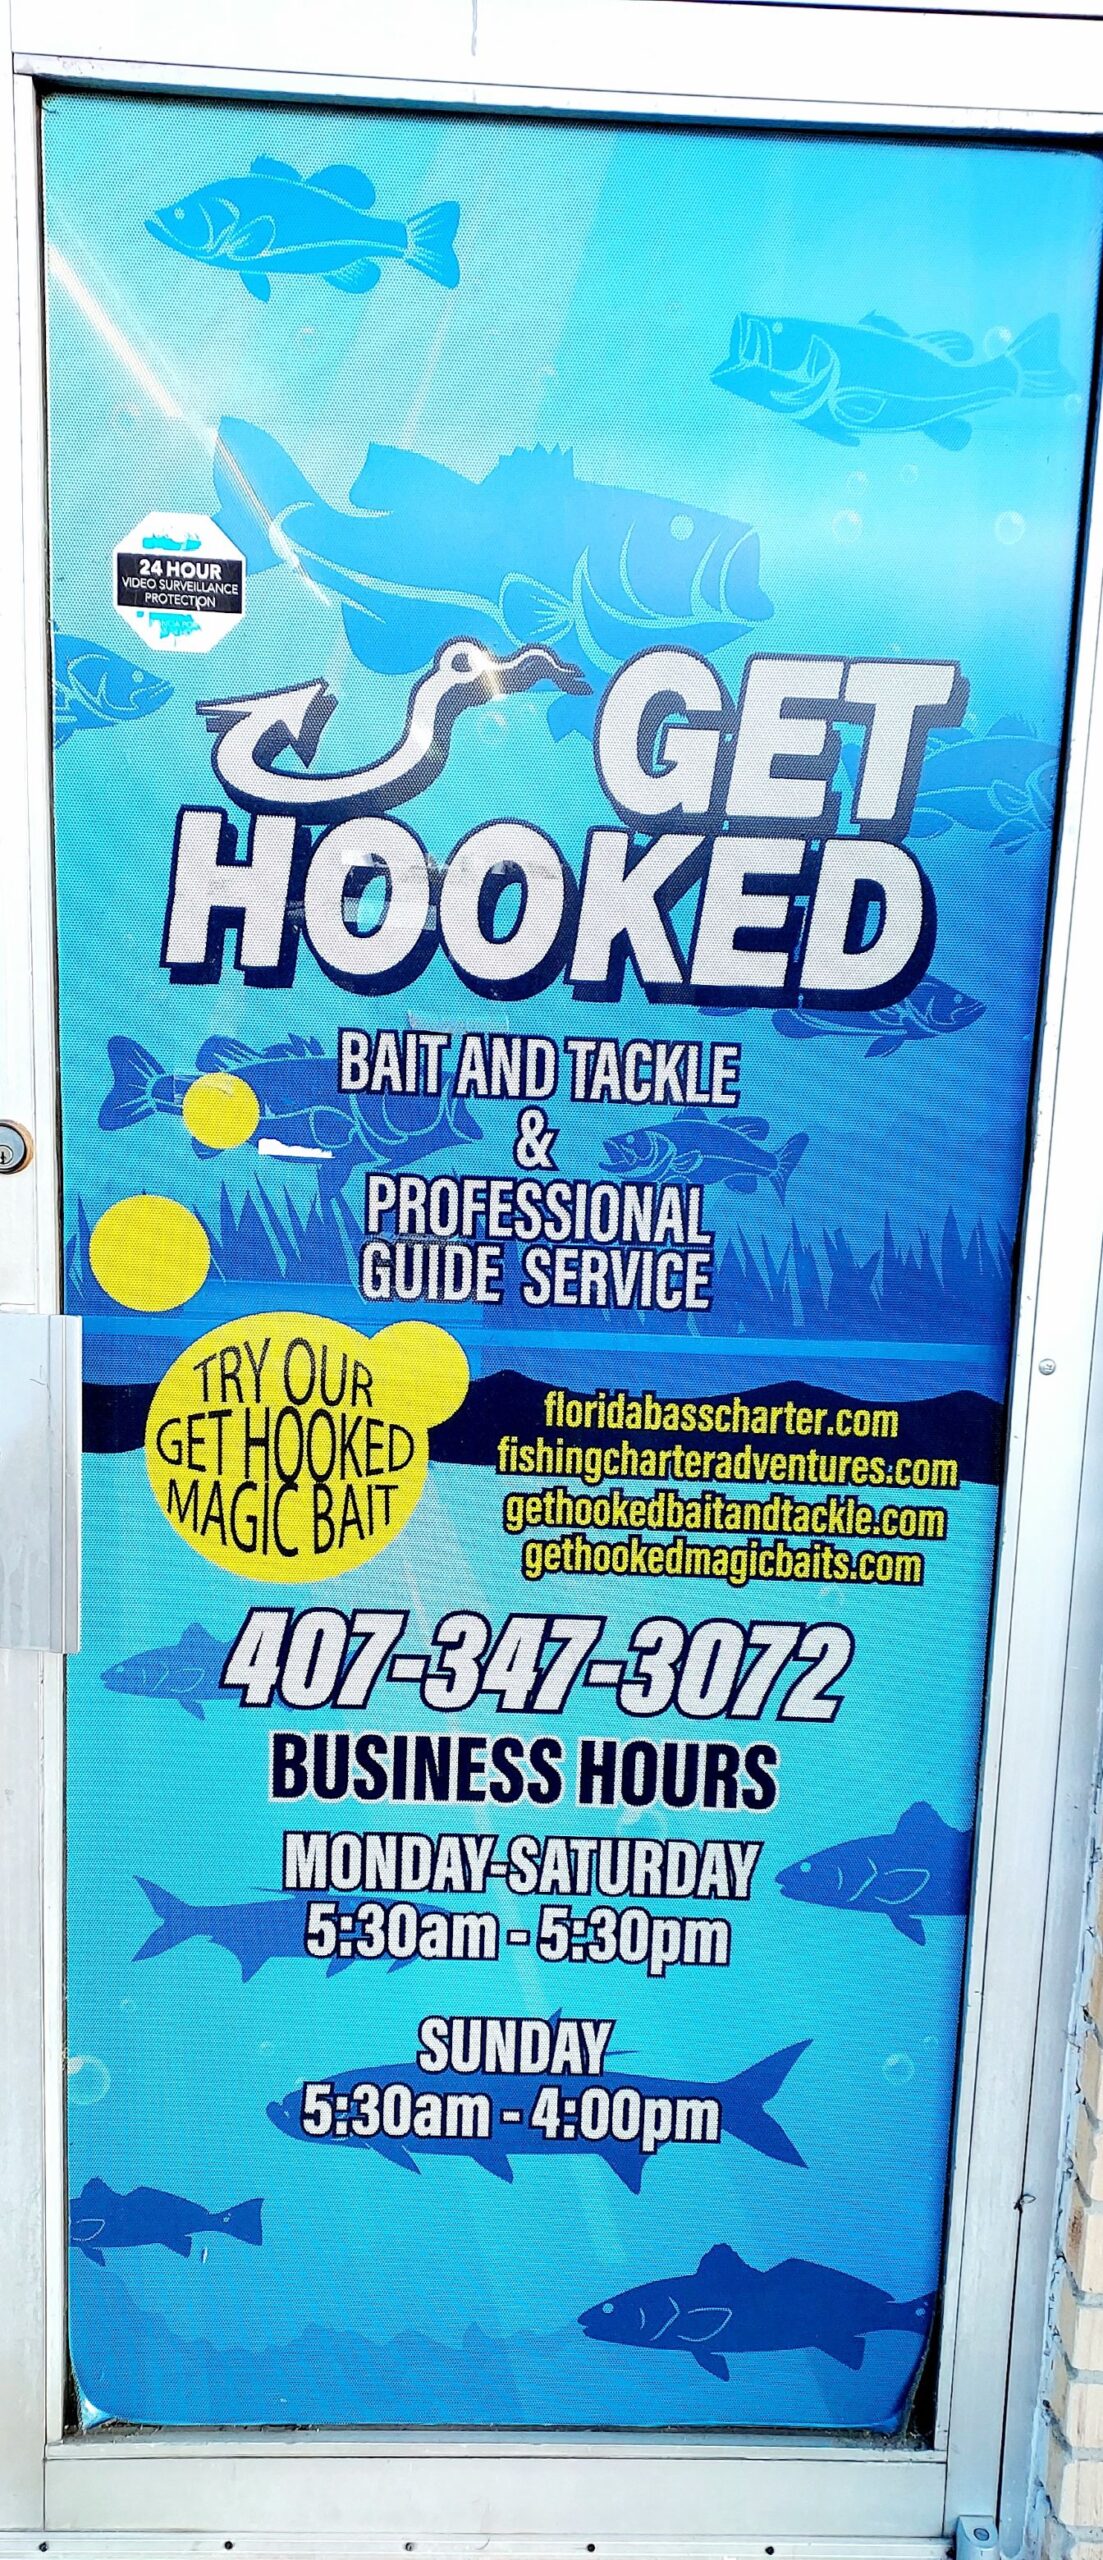 Bait and tackle and fishing supplies